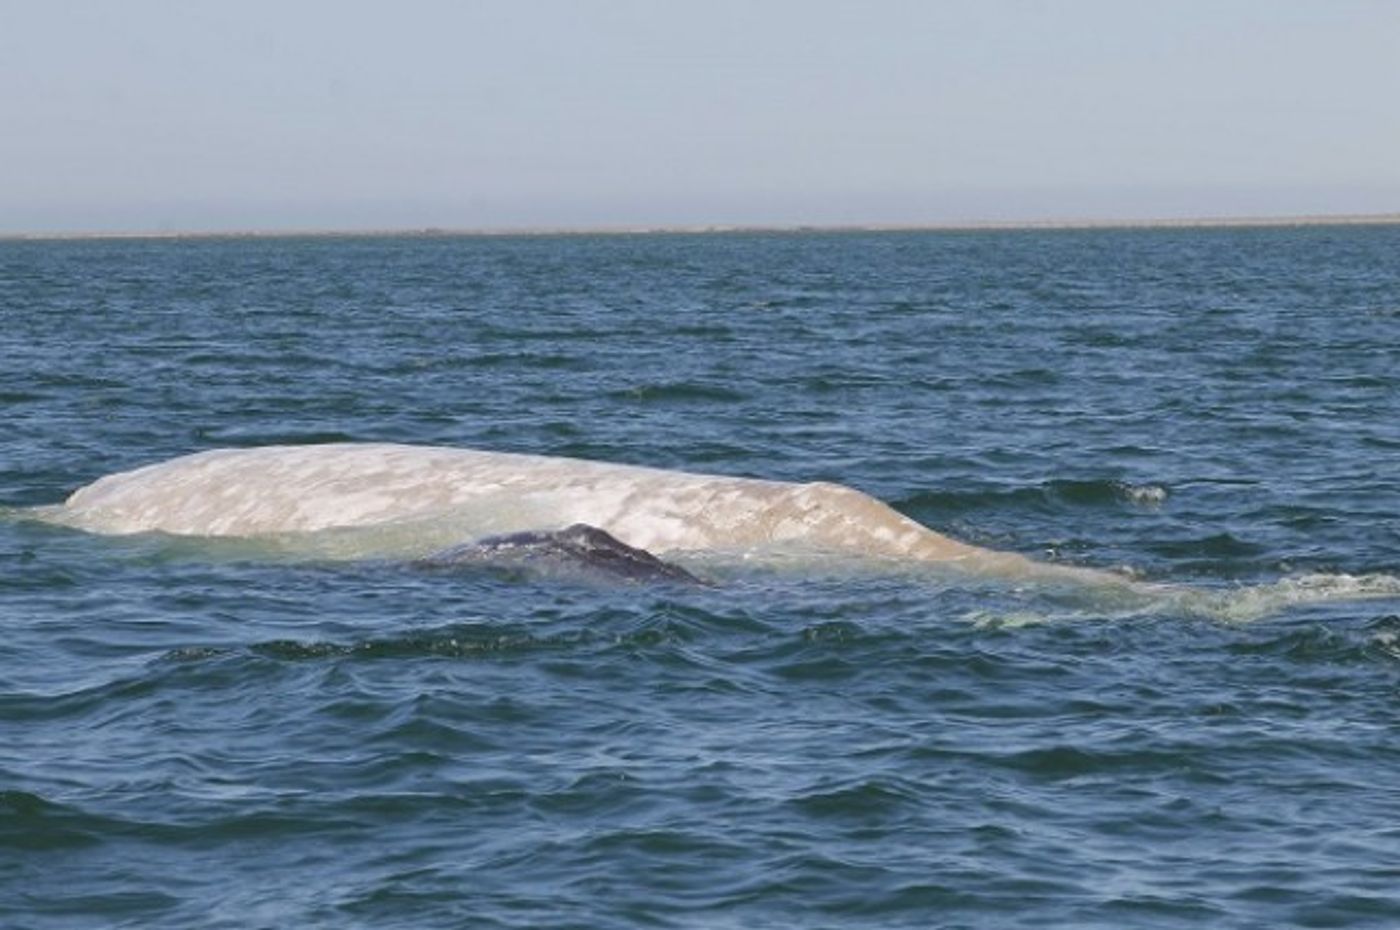 An albino gray whale known as 'Gallon of Milk' was spotted with her calf for the first time in many years.